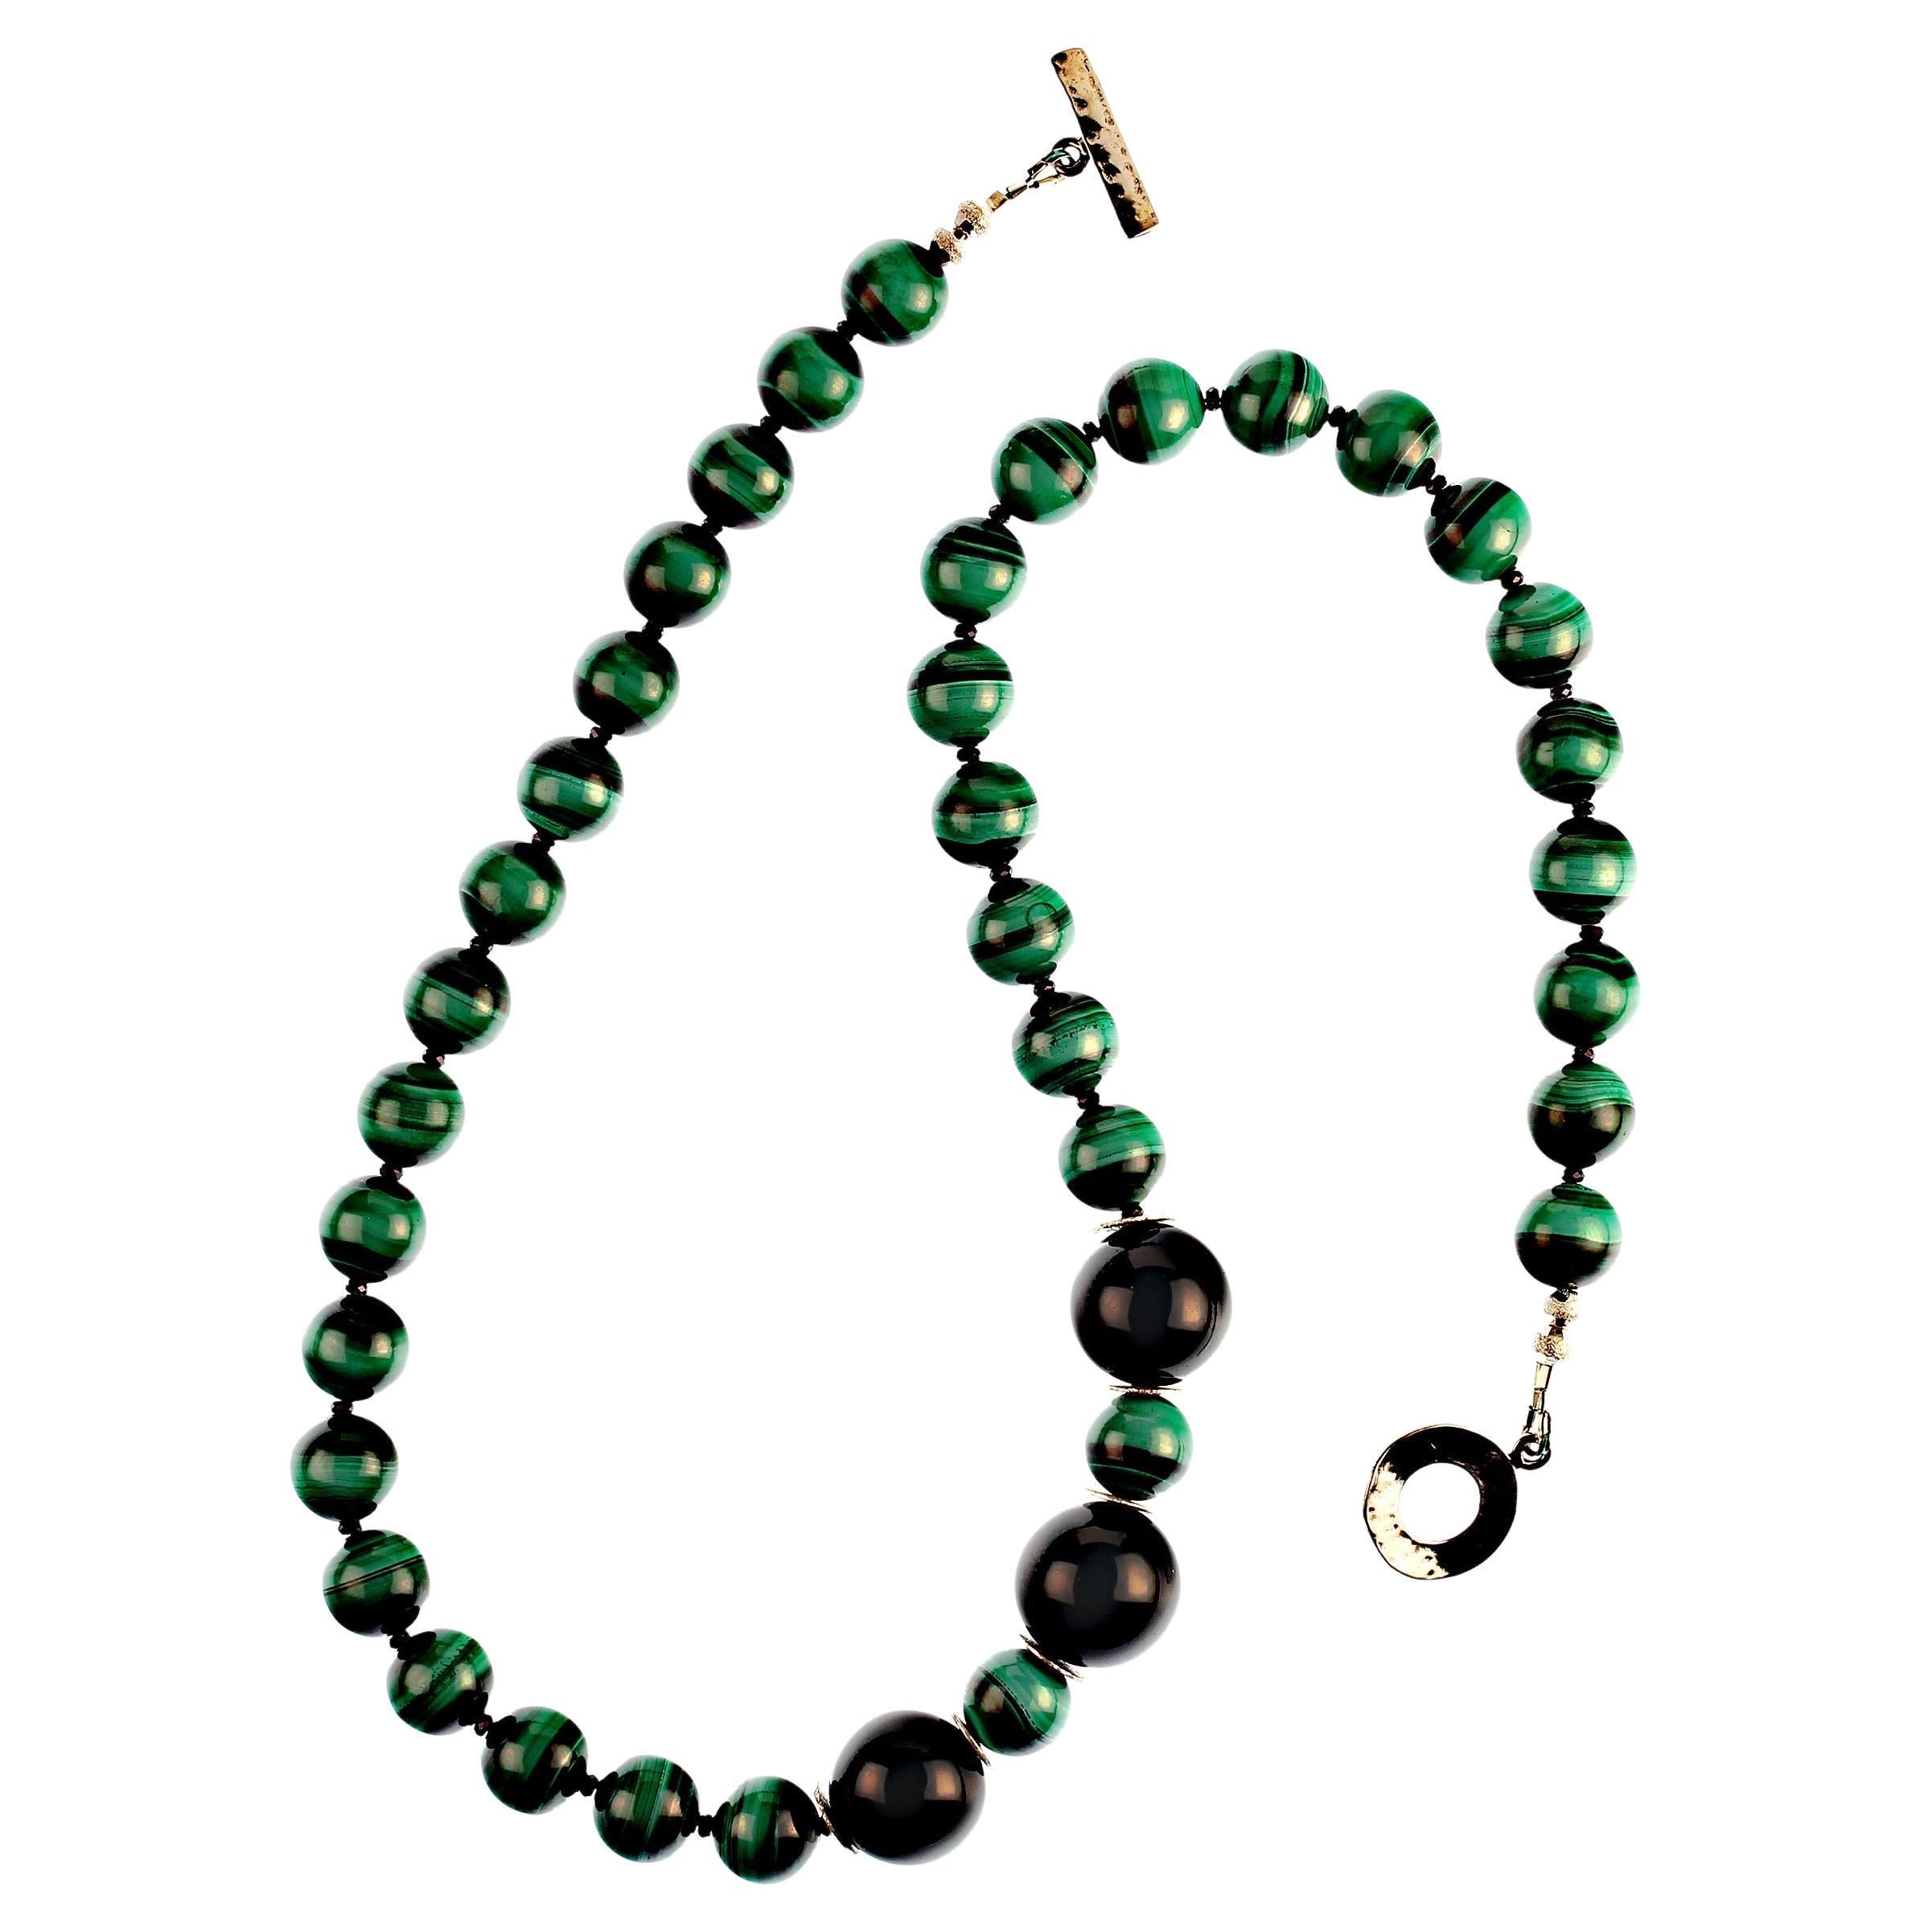 AJD Magnificent Malachite 20 inch necklace with Spinel and Onyx  Great Gift! For Sale 1